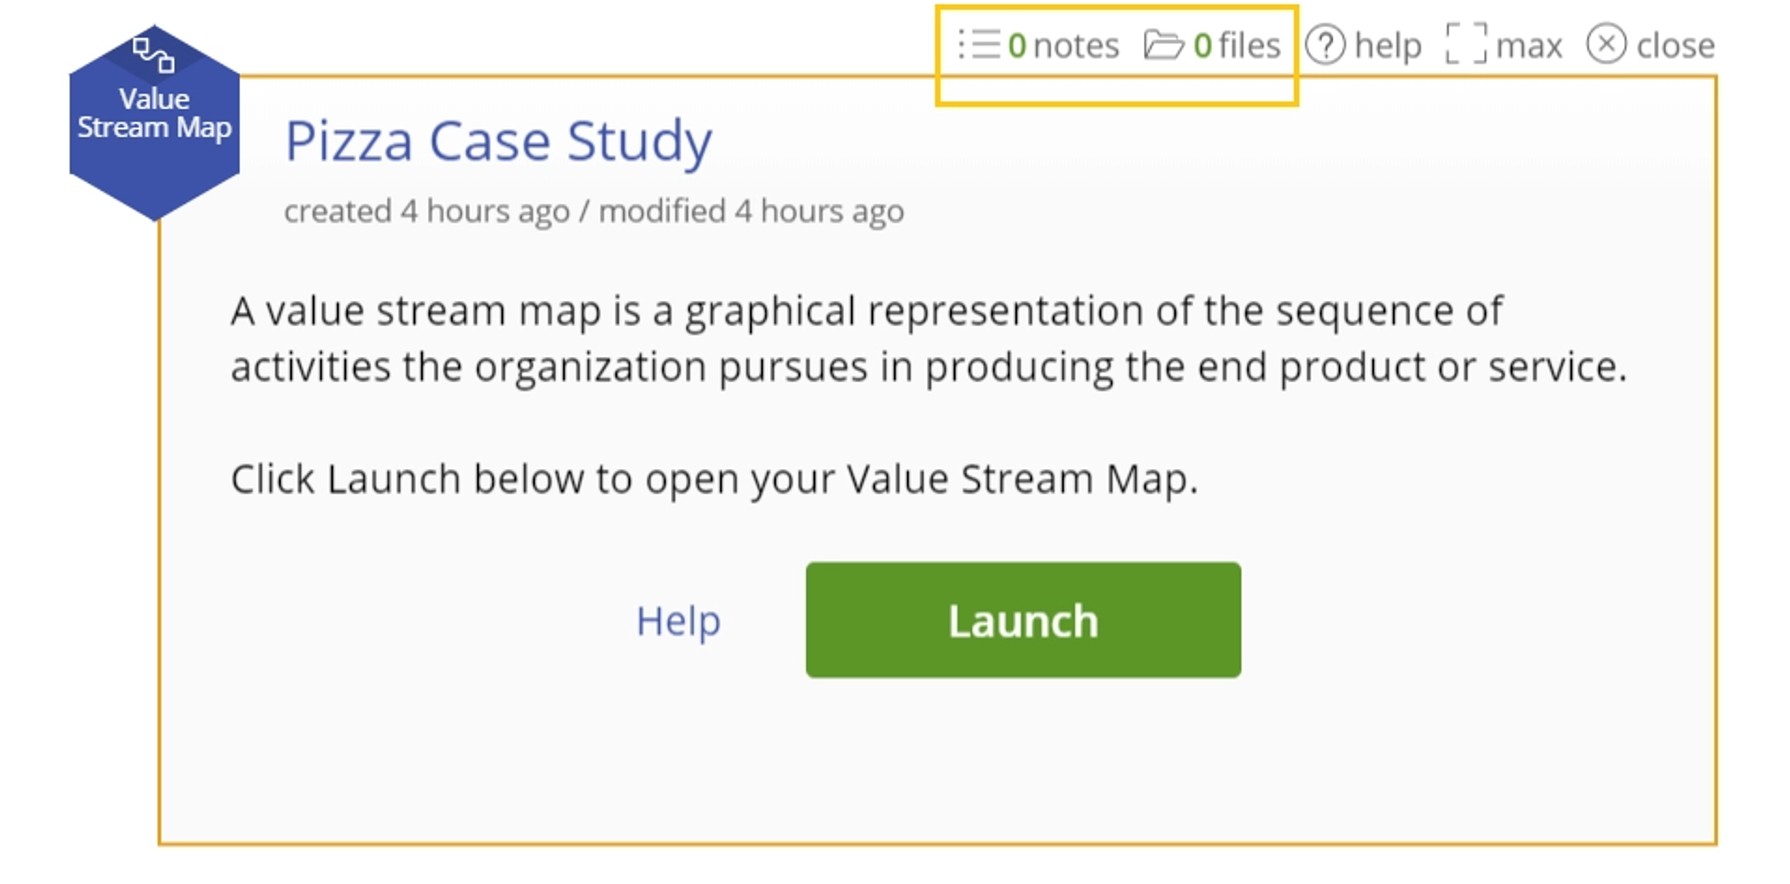 Case study map launch menu with "notes" and "files" icons highlighted.